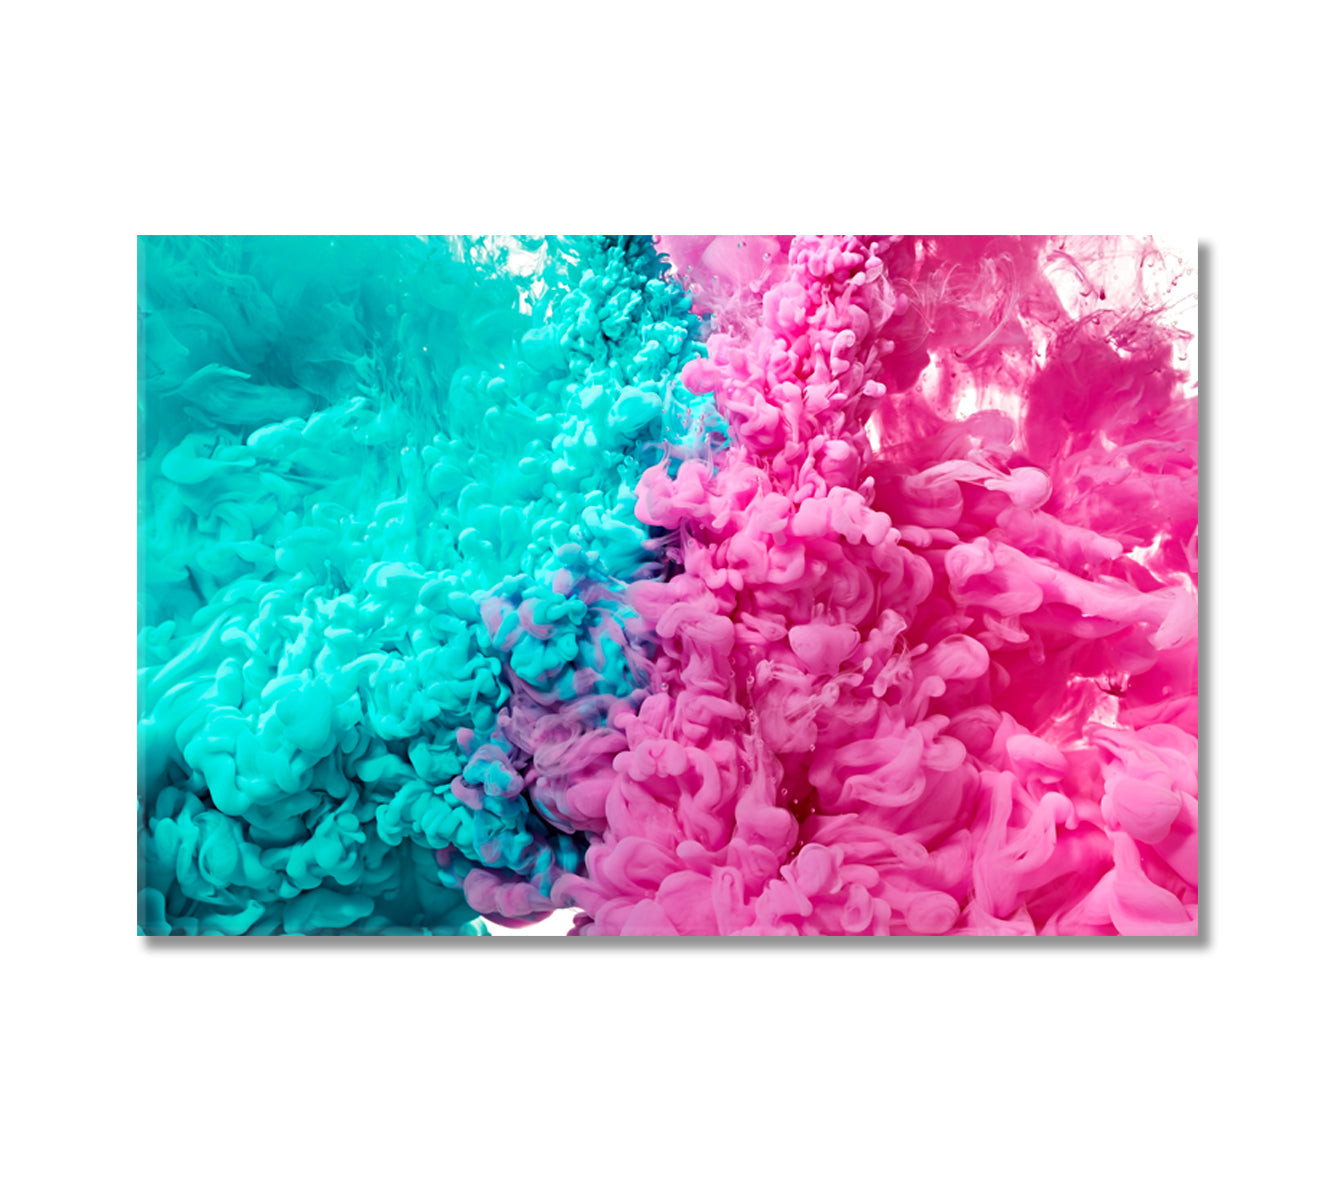 Pink and Green Ink Paint Drops in Water Canvas Print-Canvas Print-CetArt-1 Panel-24x16 inches-CetArt